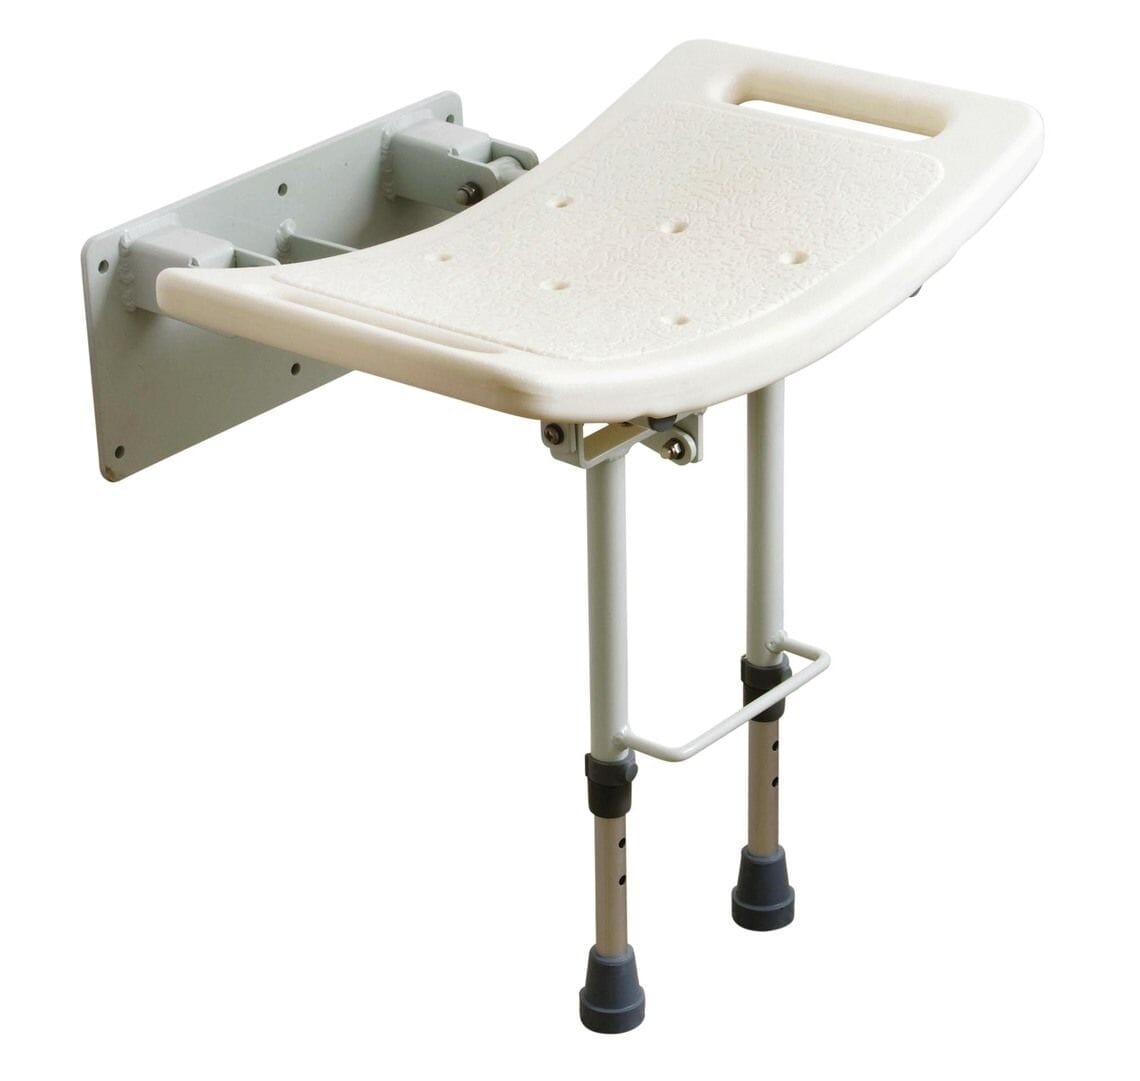 View Shower Seat Drop Down In White With Legs  information